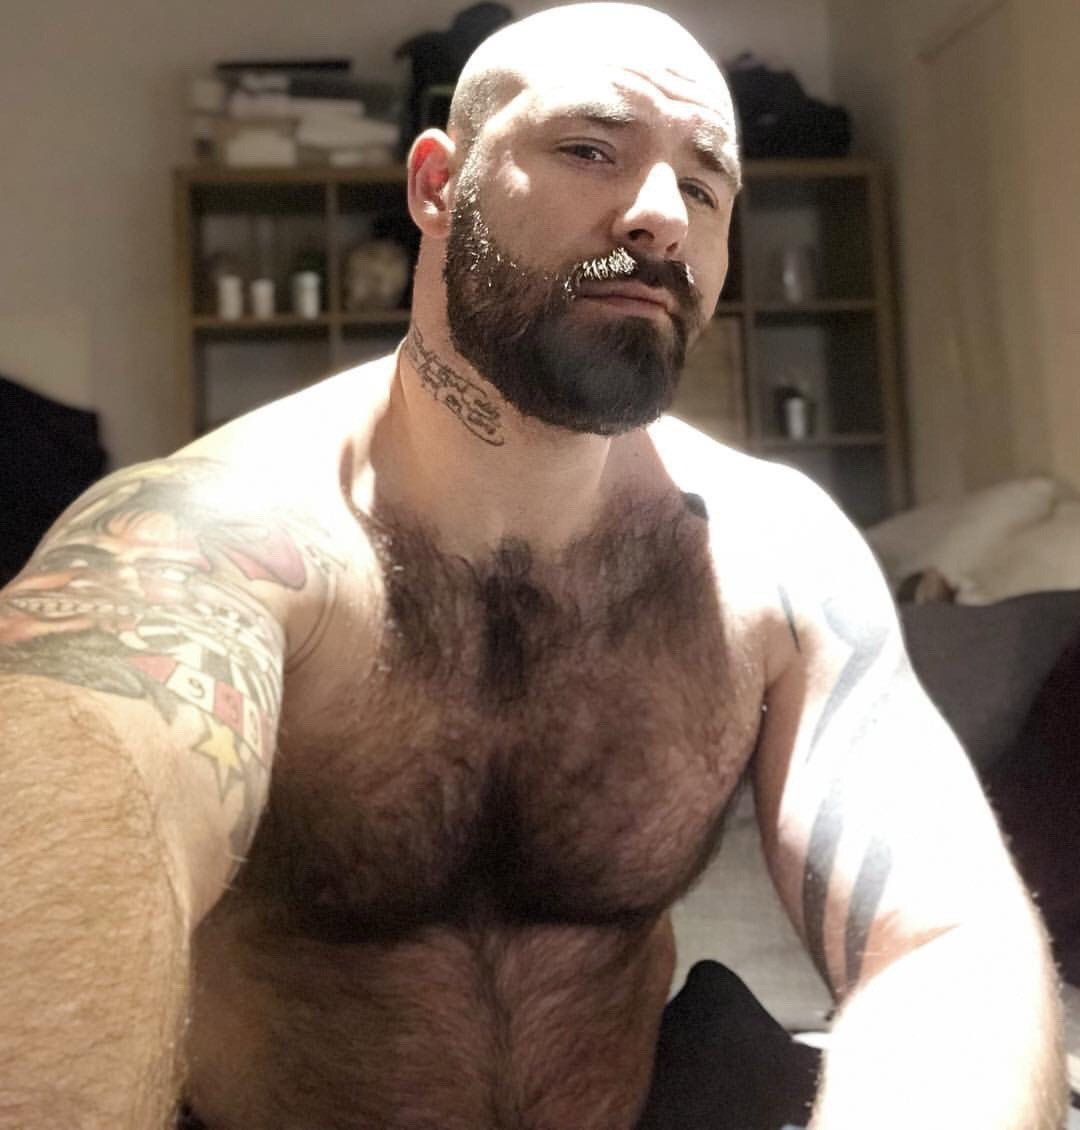 Photo by Smitty with the username @Resol702,  March 15, 2019 at 12:00 AM. The post is about the topic Hairy bears